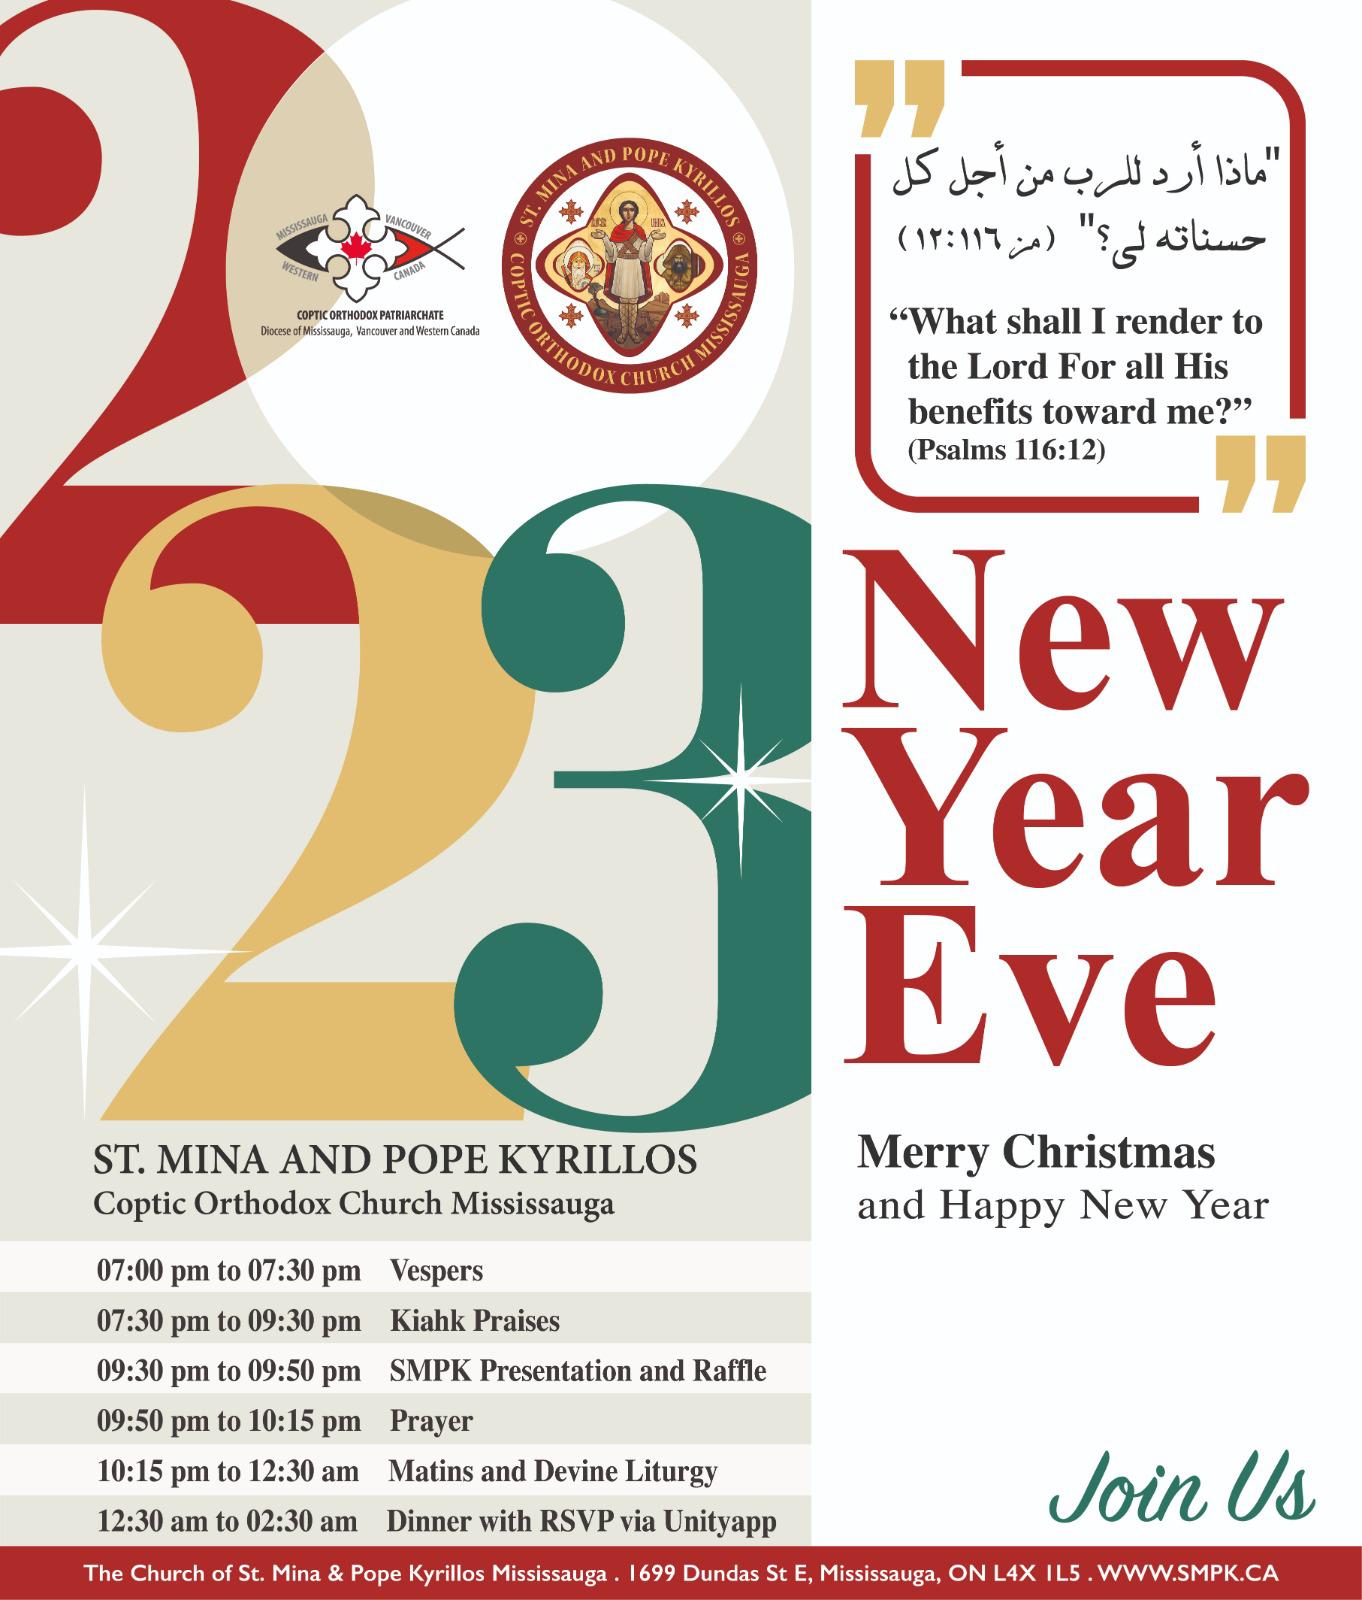 New Year's Eve 2023 Poster
Events start at 7:00pm and continue to 2:30am the next day.